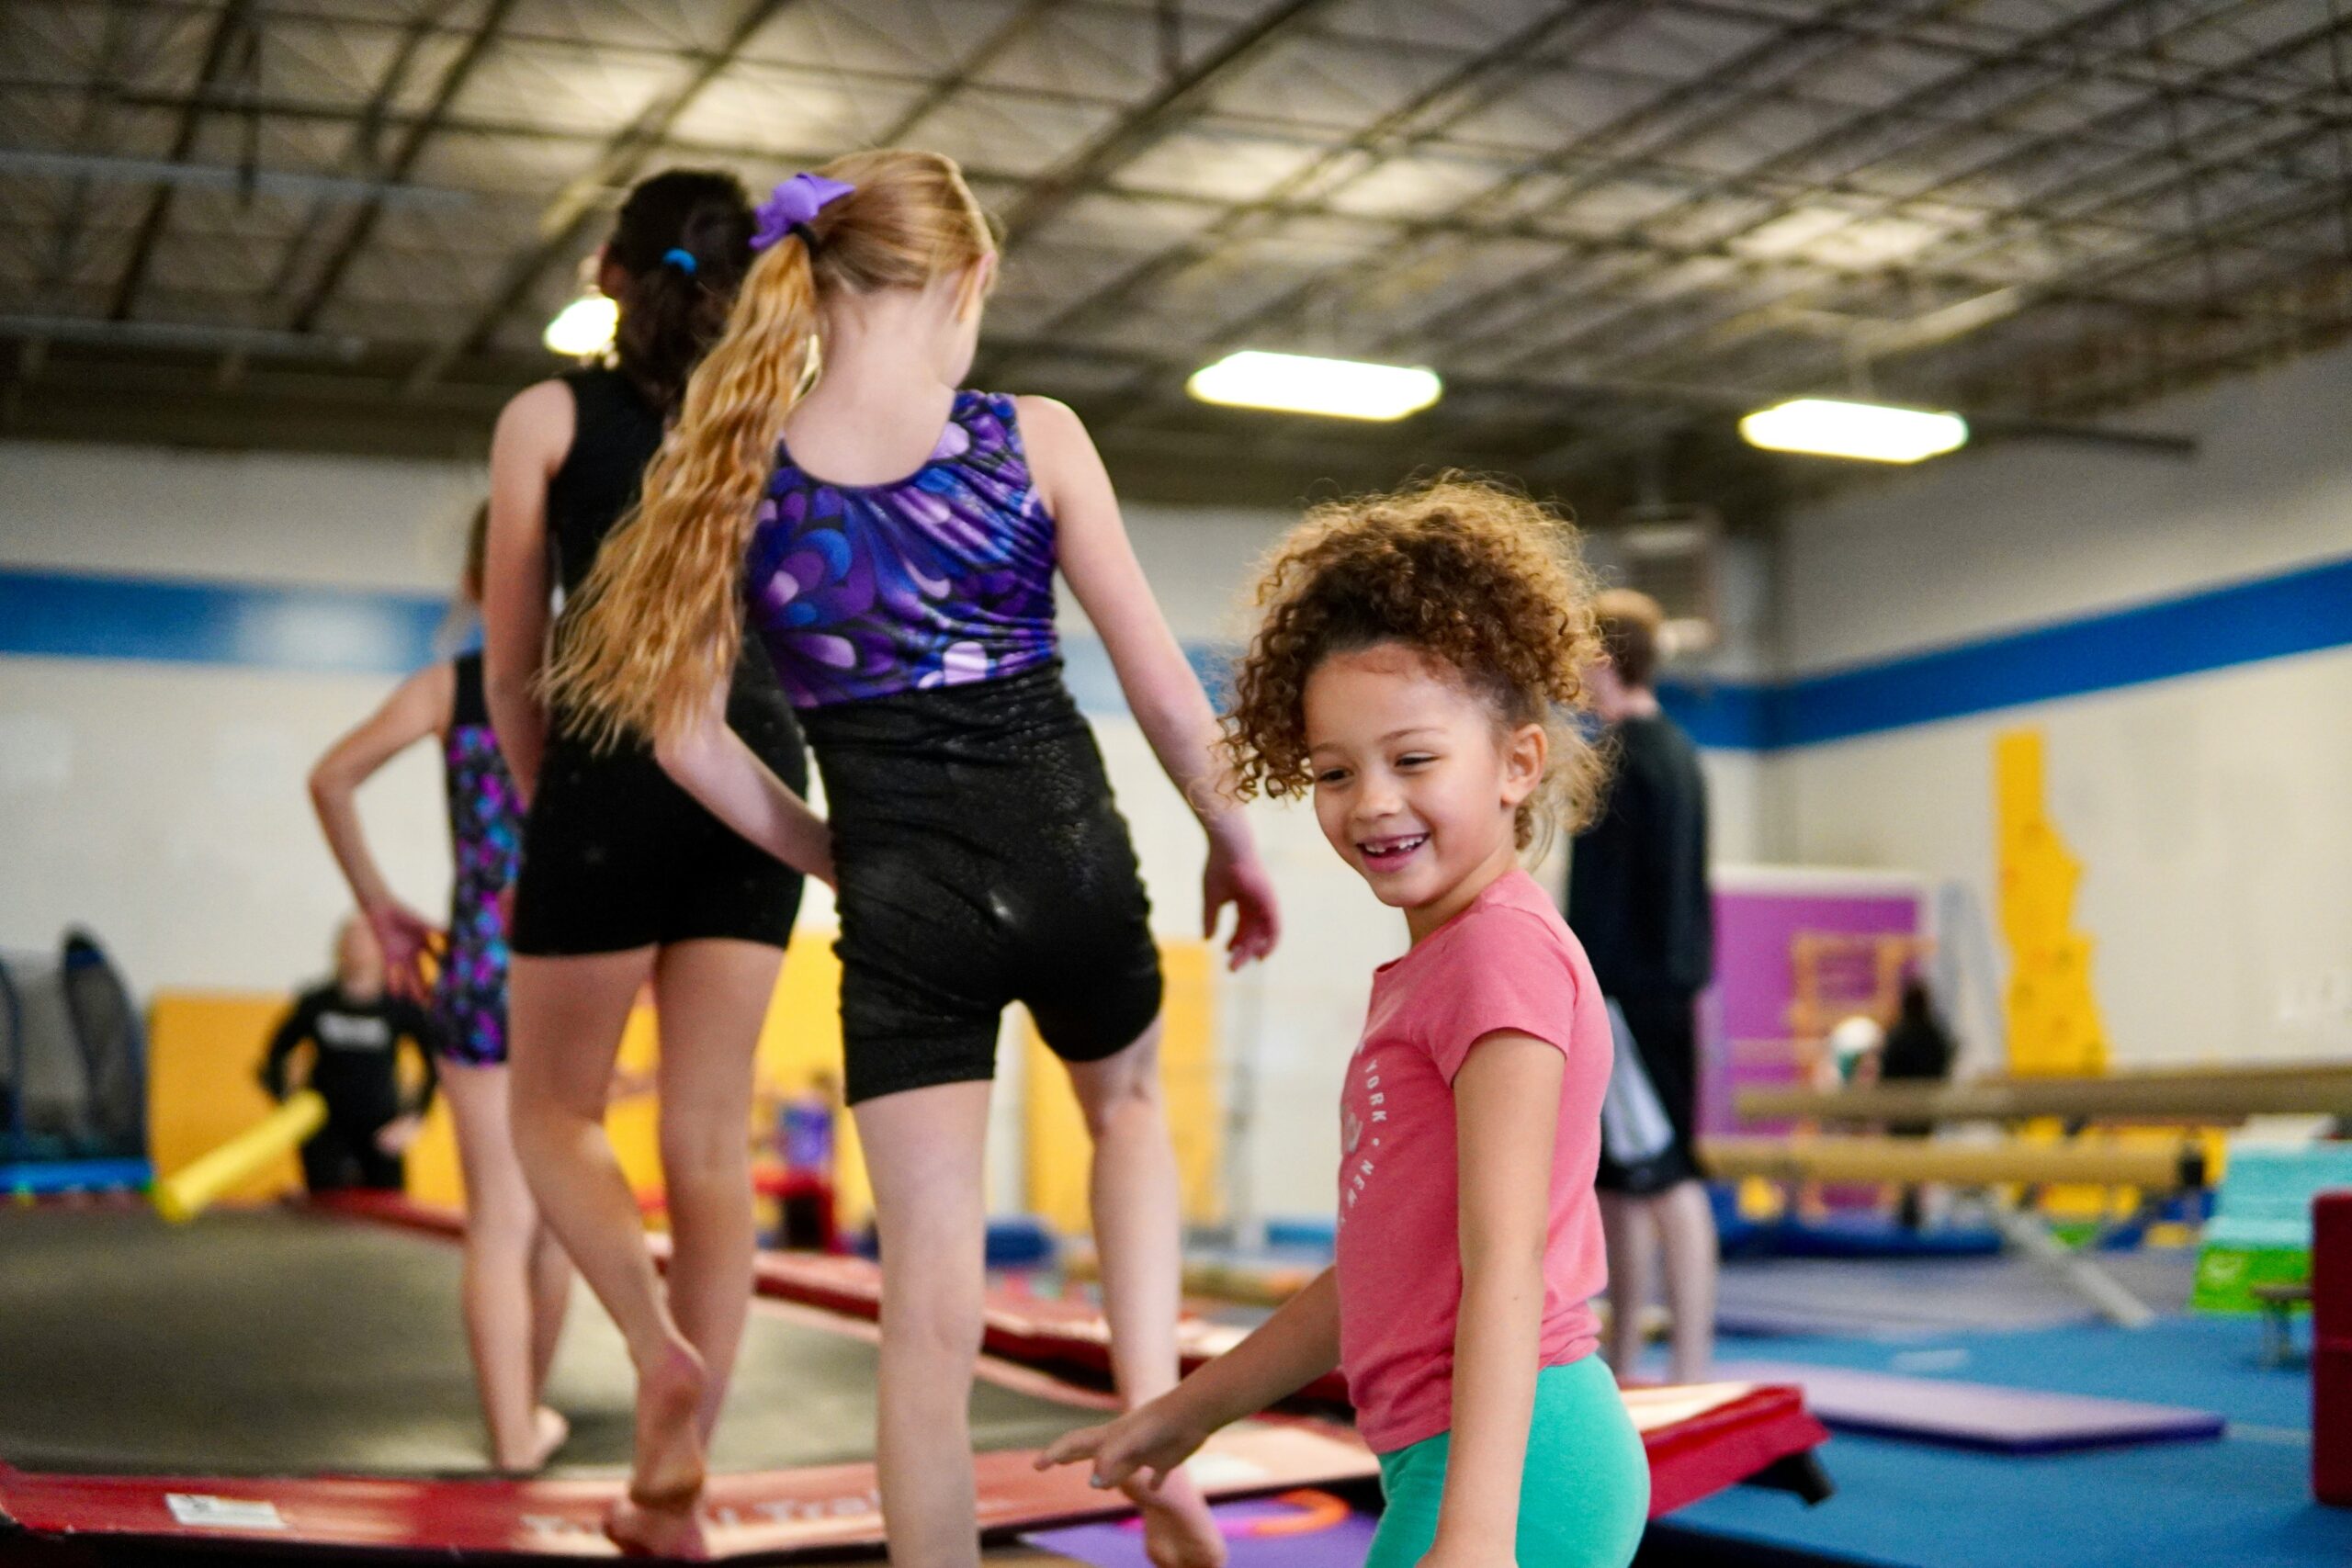 Kids Gymnastics Spring and Summer camp in Upland and Claremont, ca